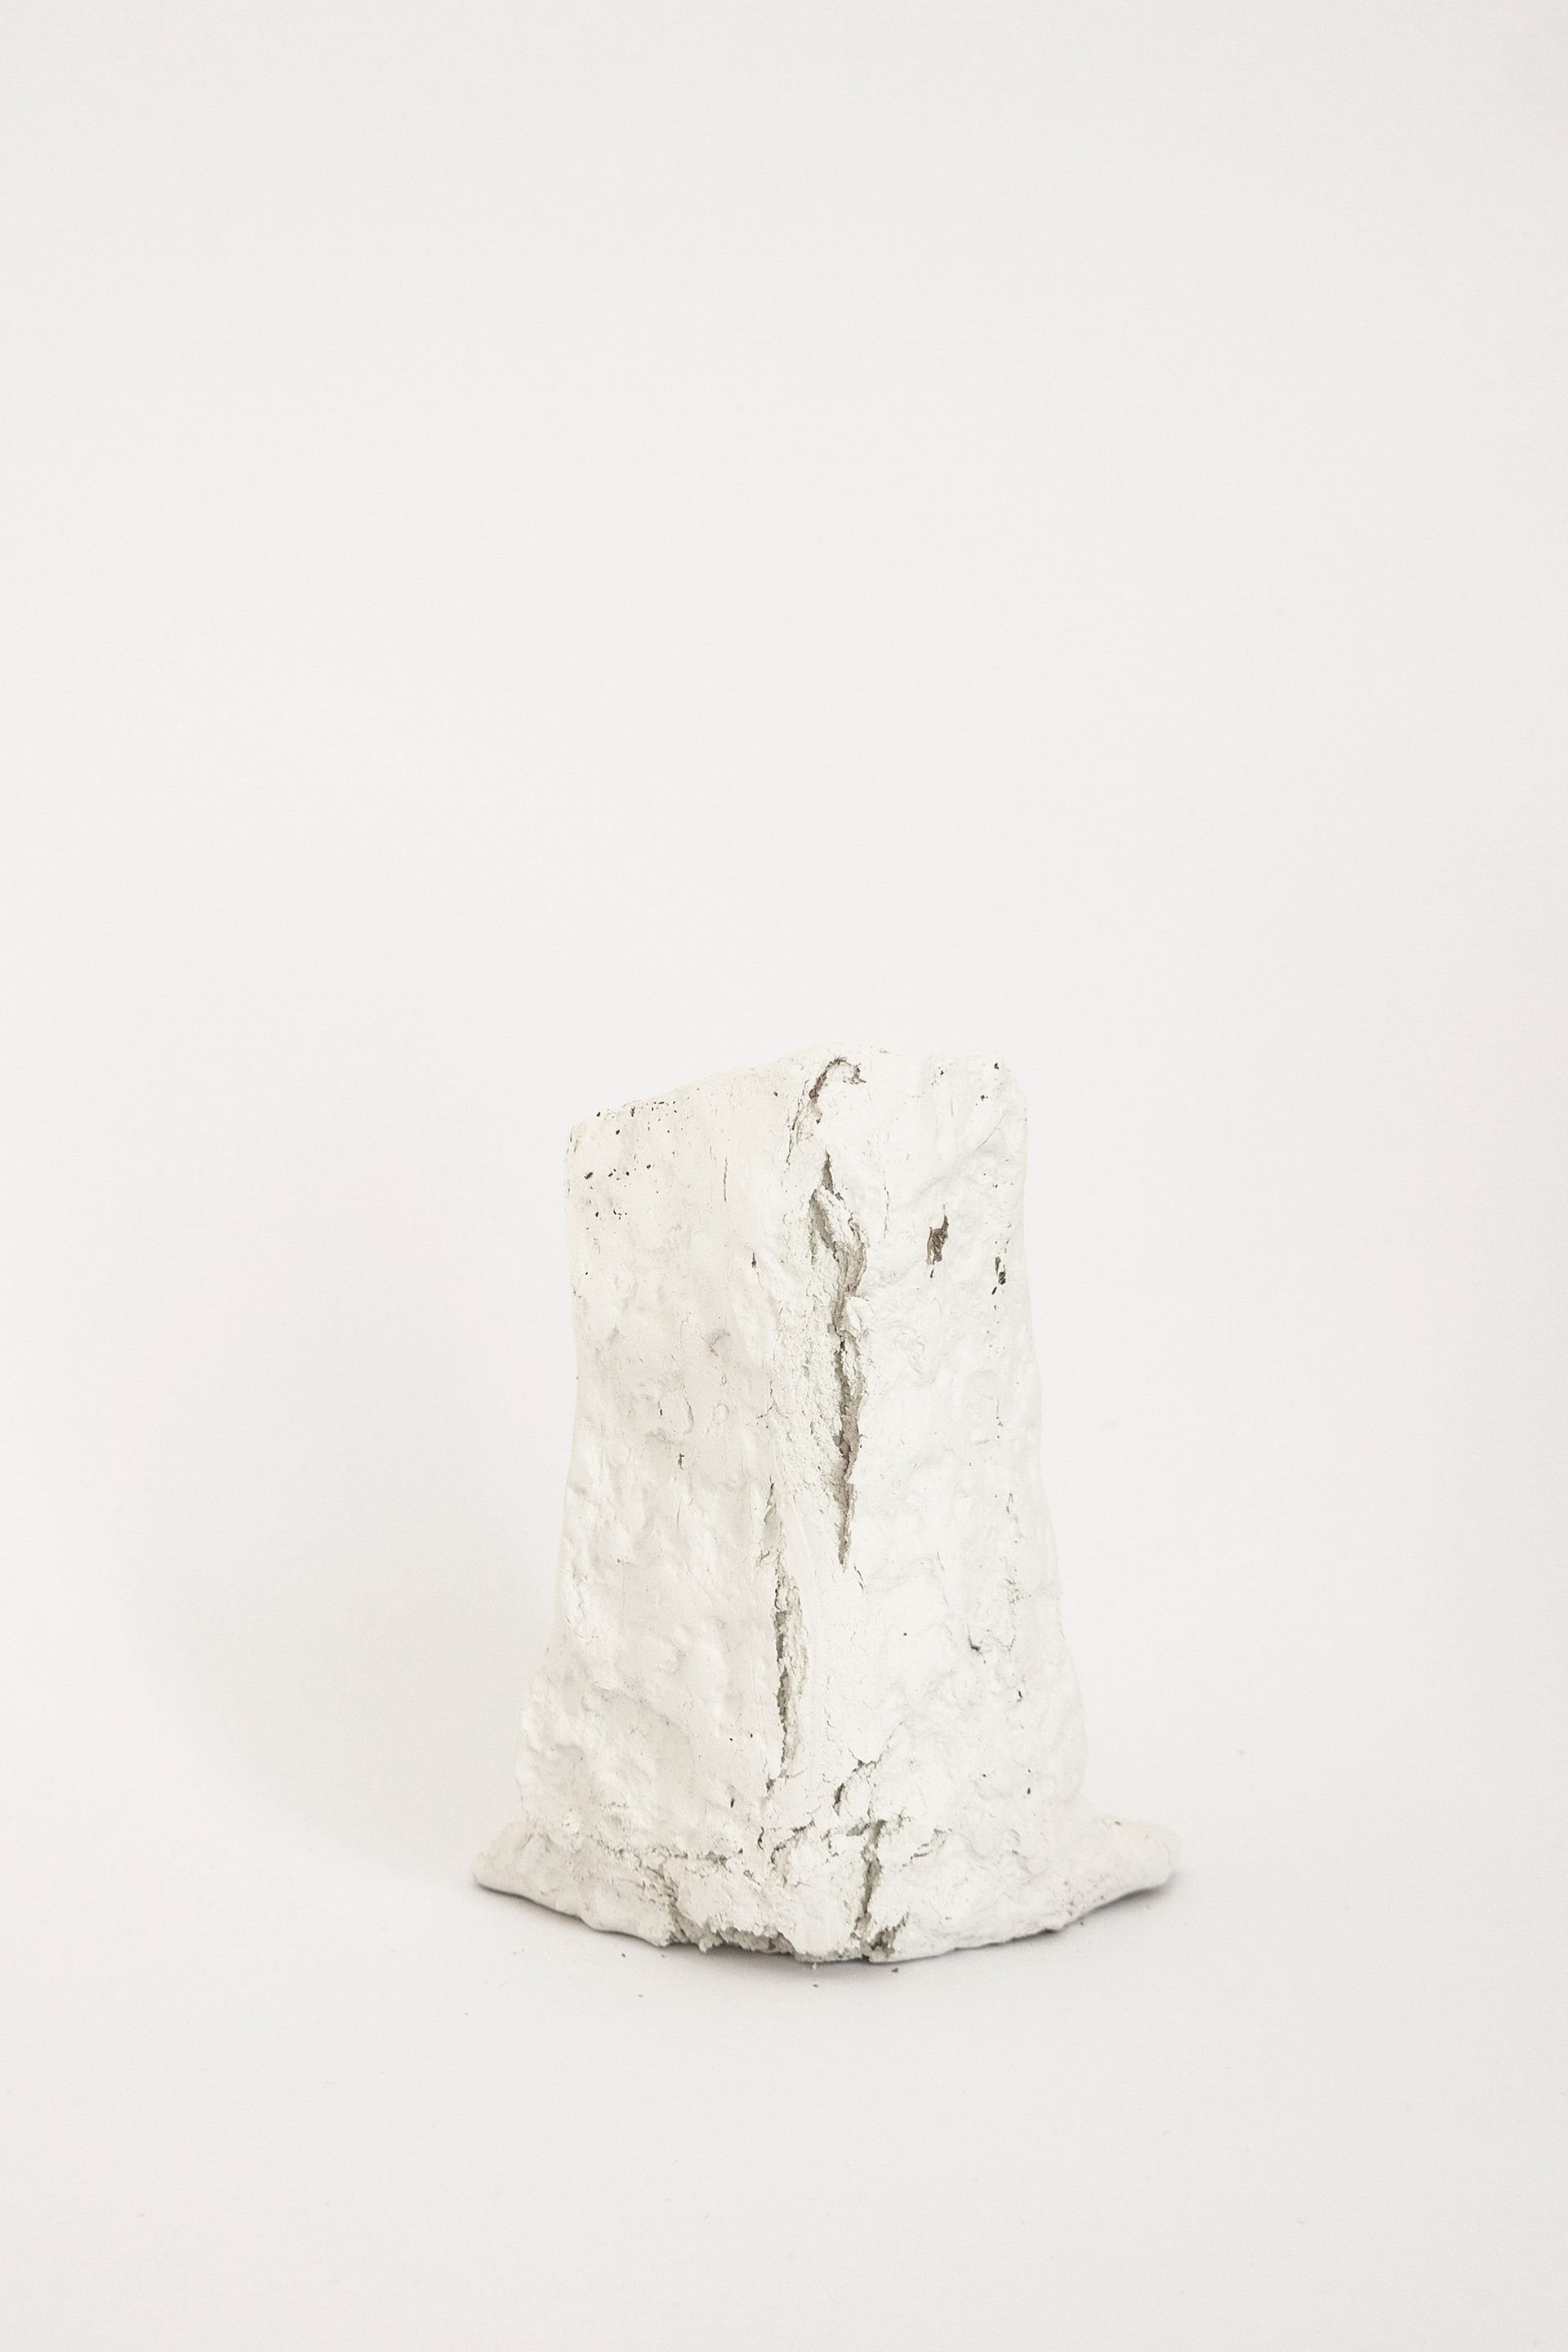 Corners for Relief (No. 5, Back), 2019